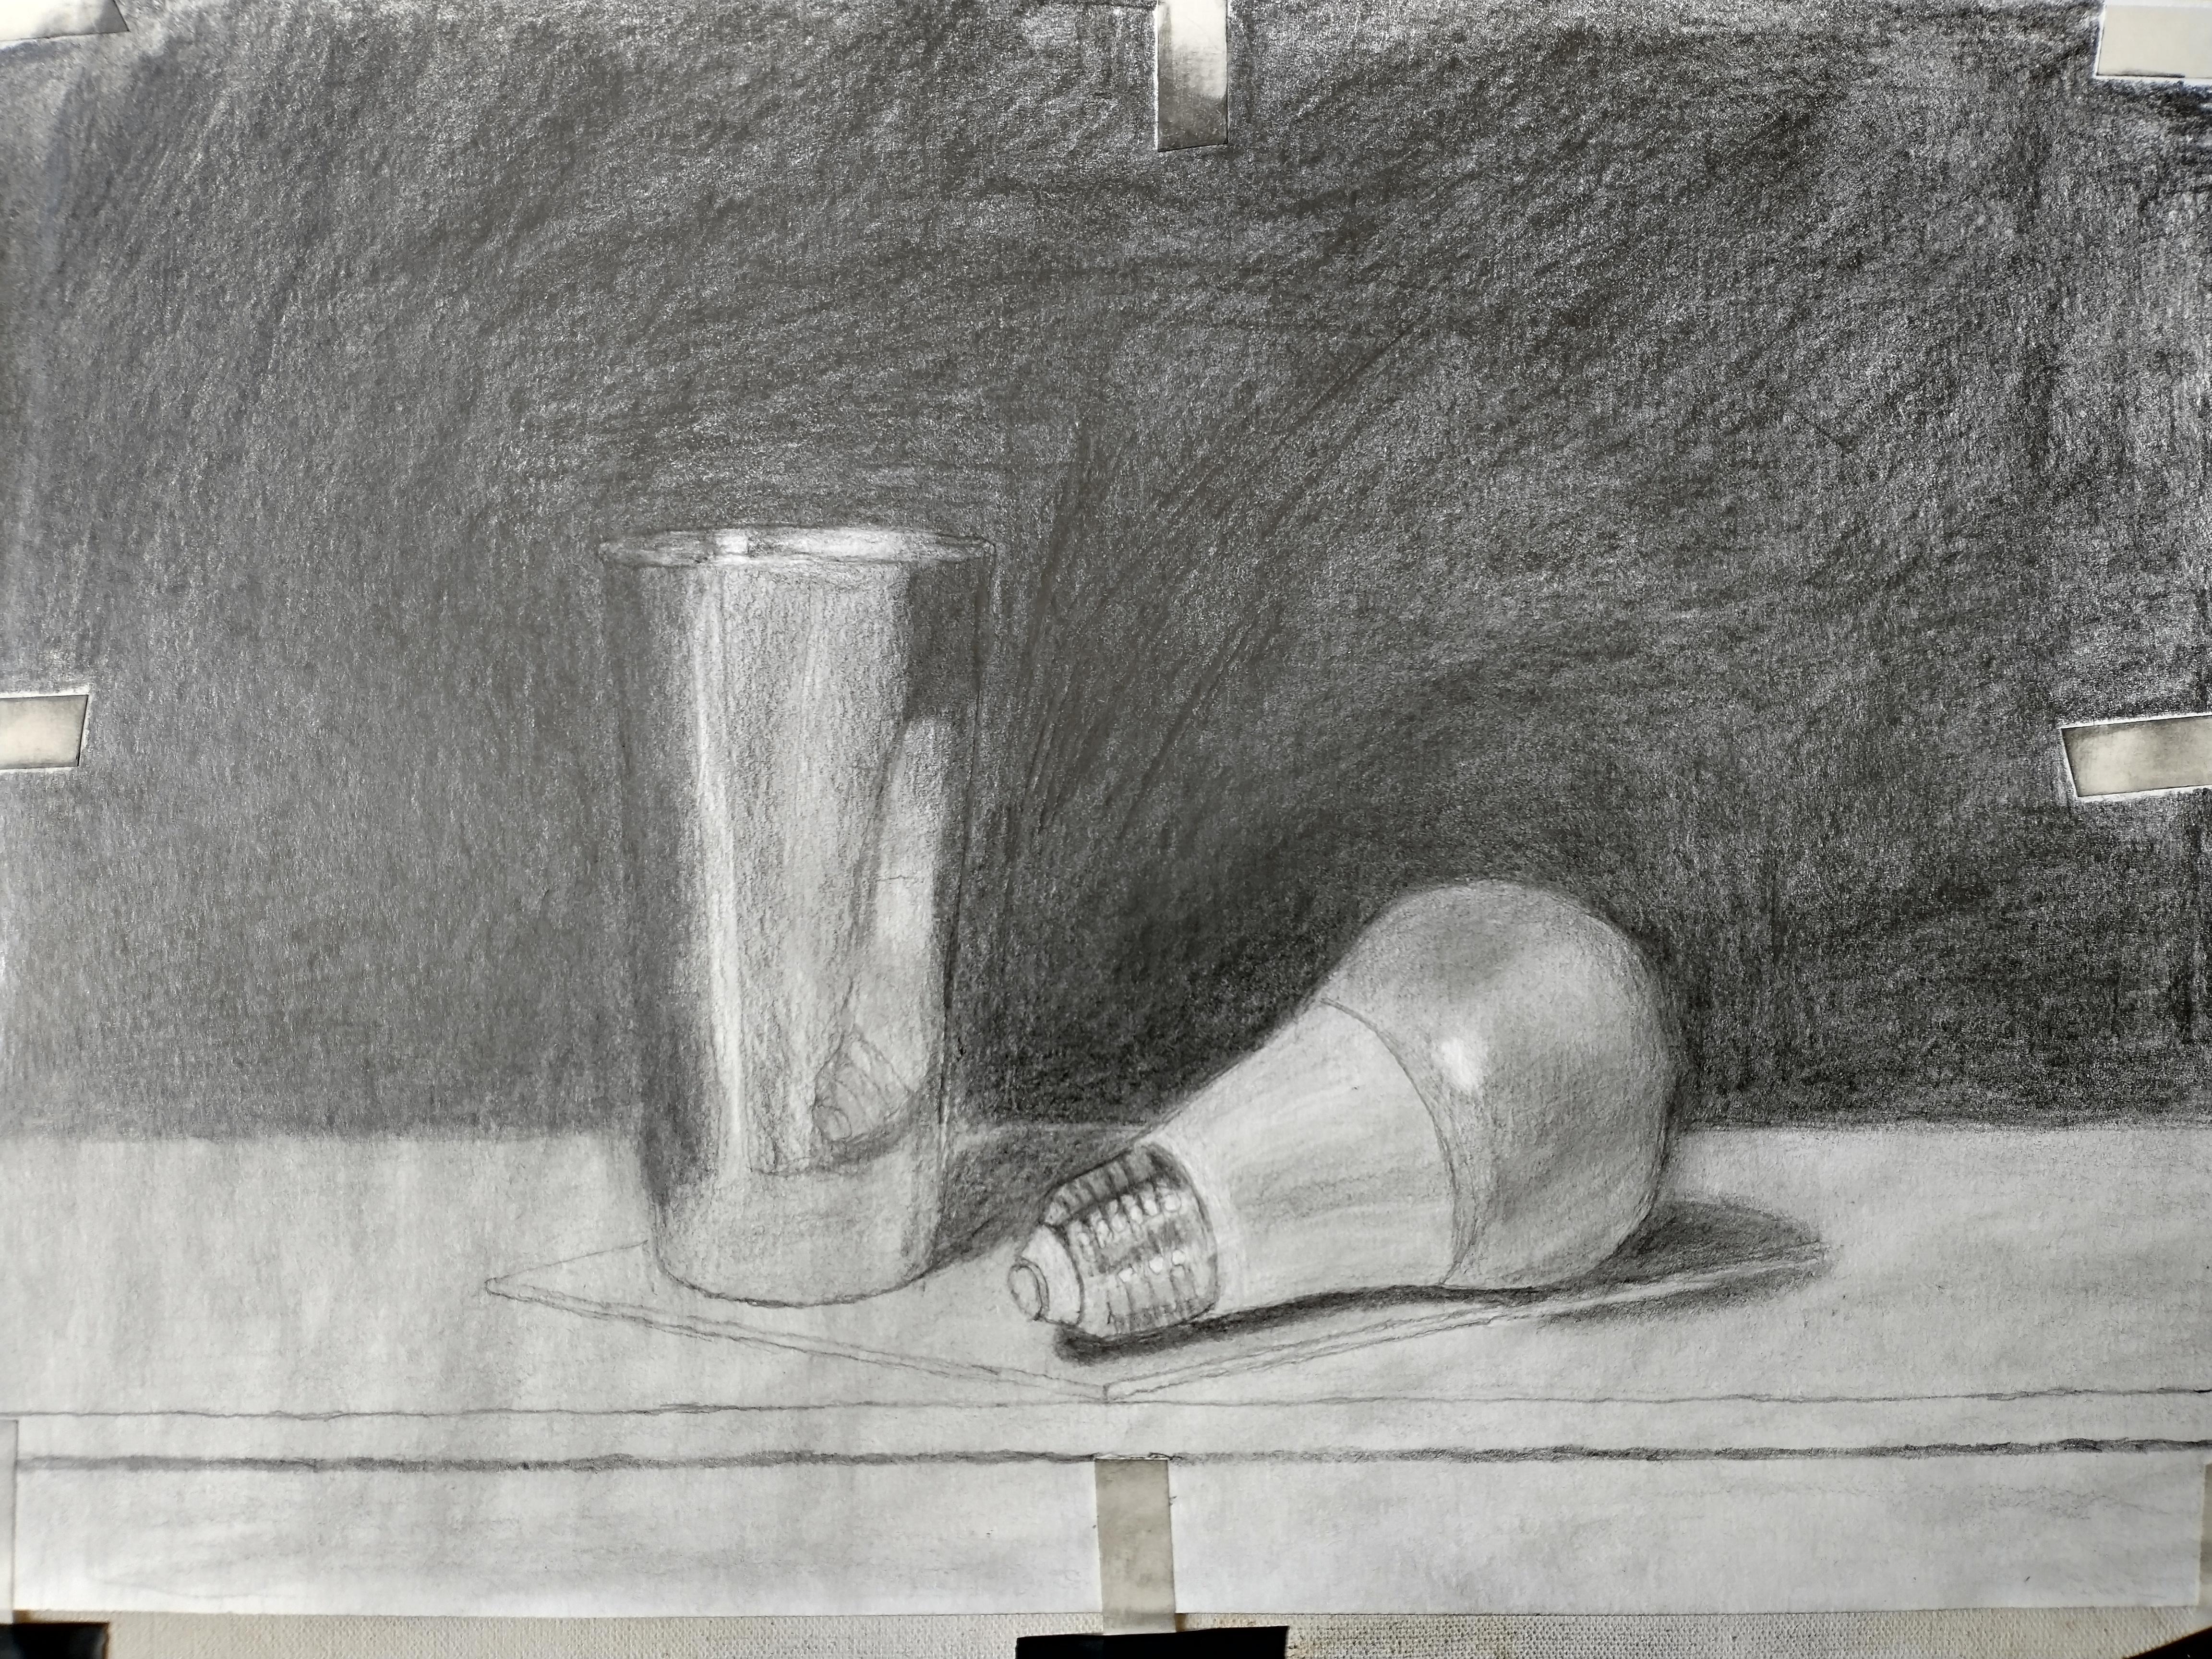 Sketching with Graphite